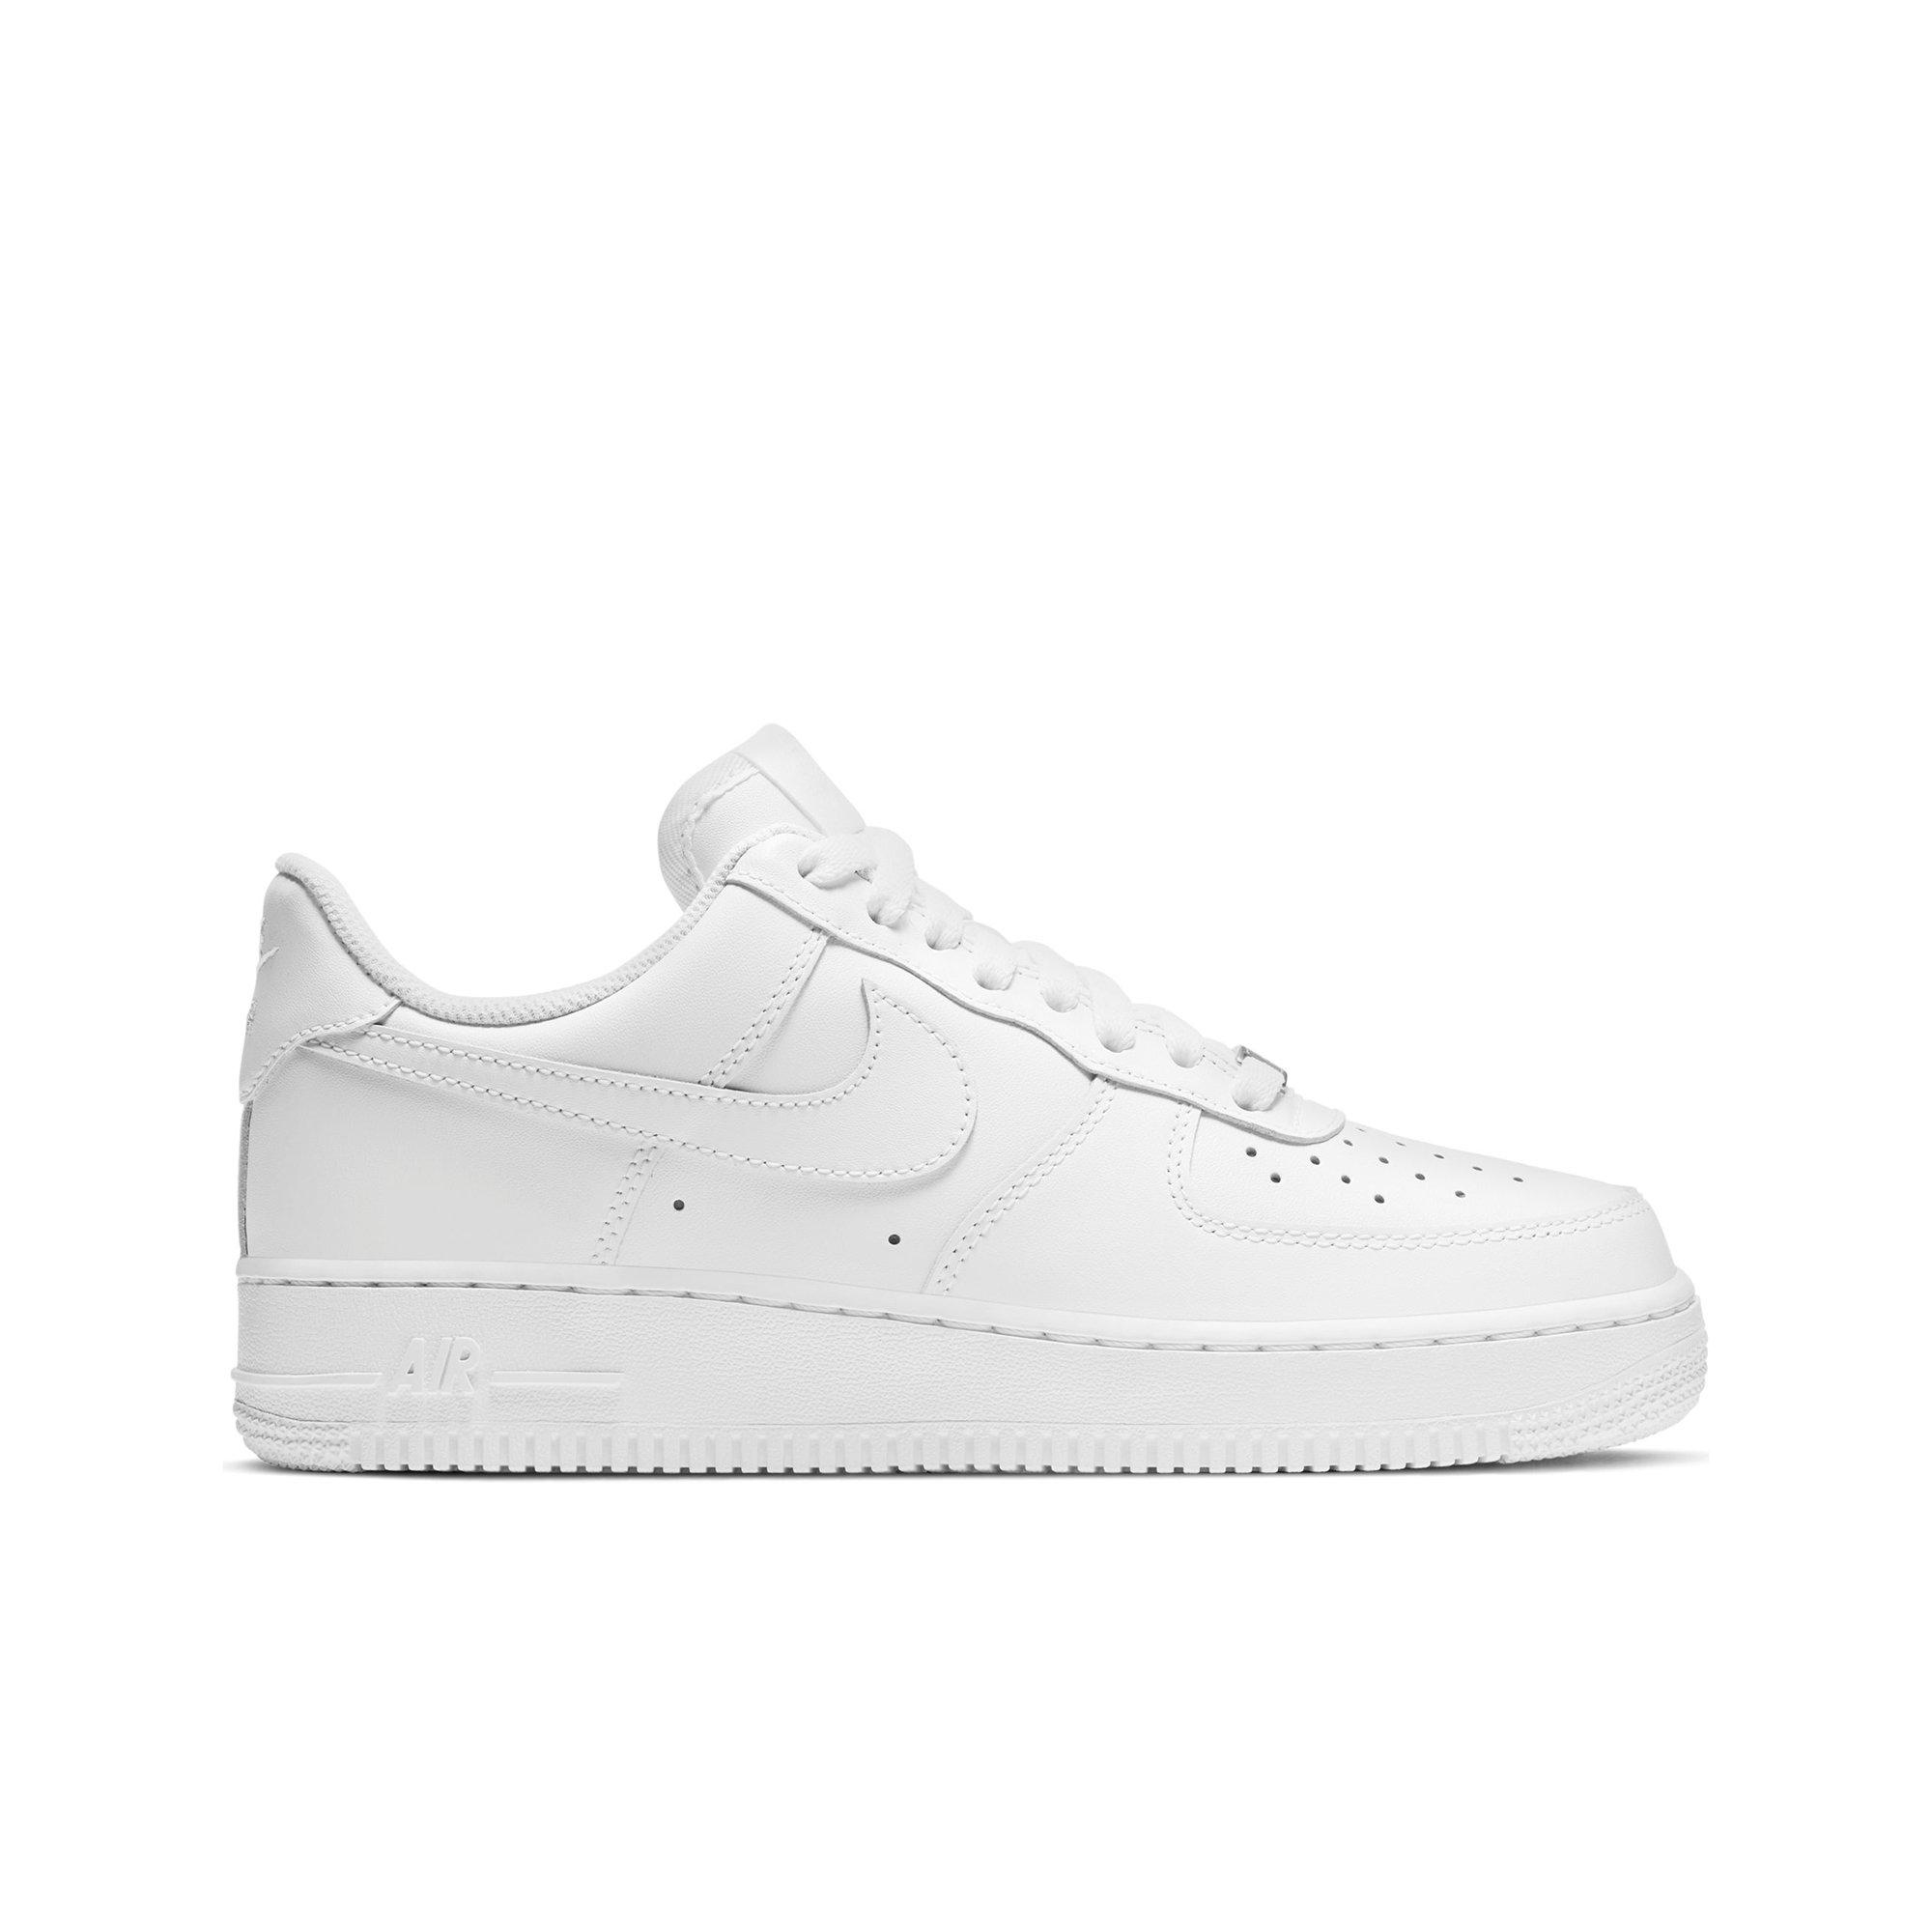 air force ones white womens size 7